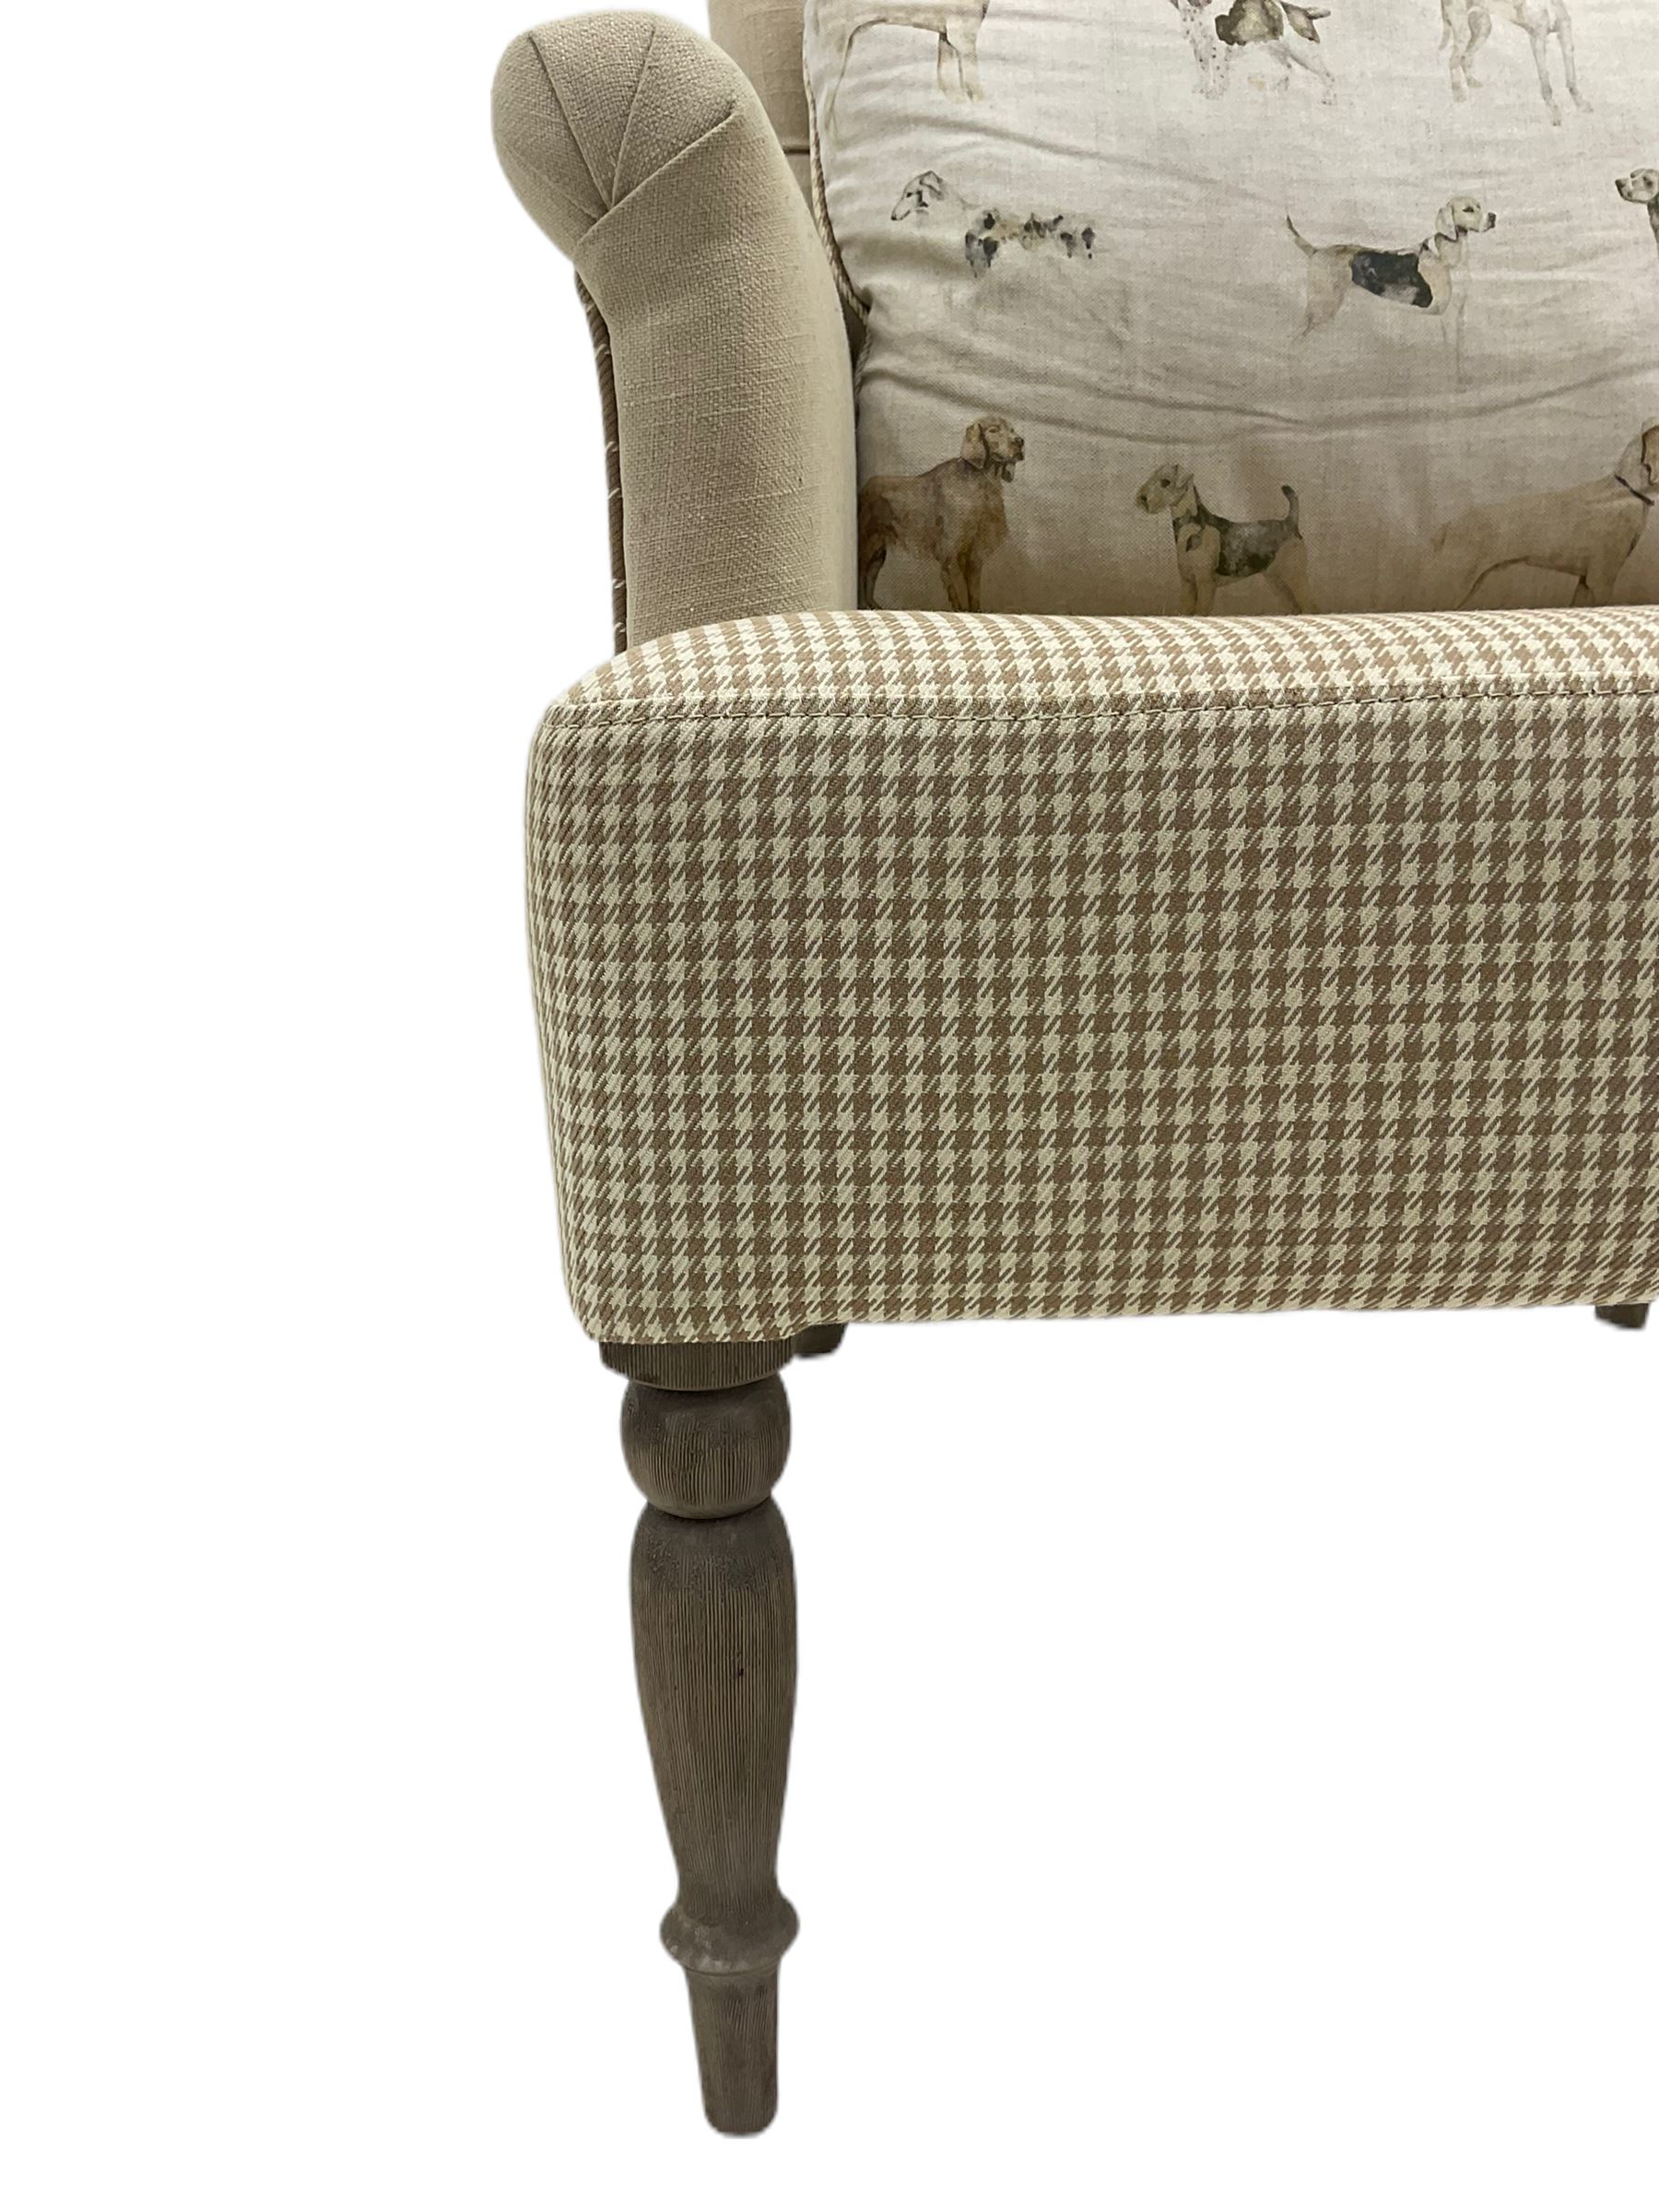 Voyage Maisonette - Nero Armchair upholstered in beige and check fabric - Image 3 of 8